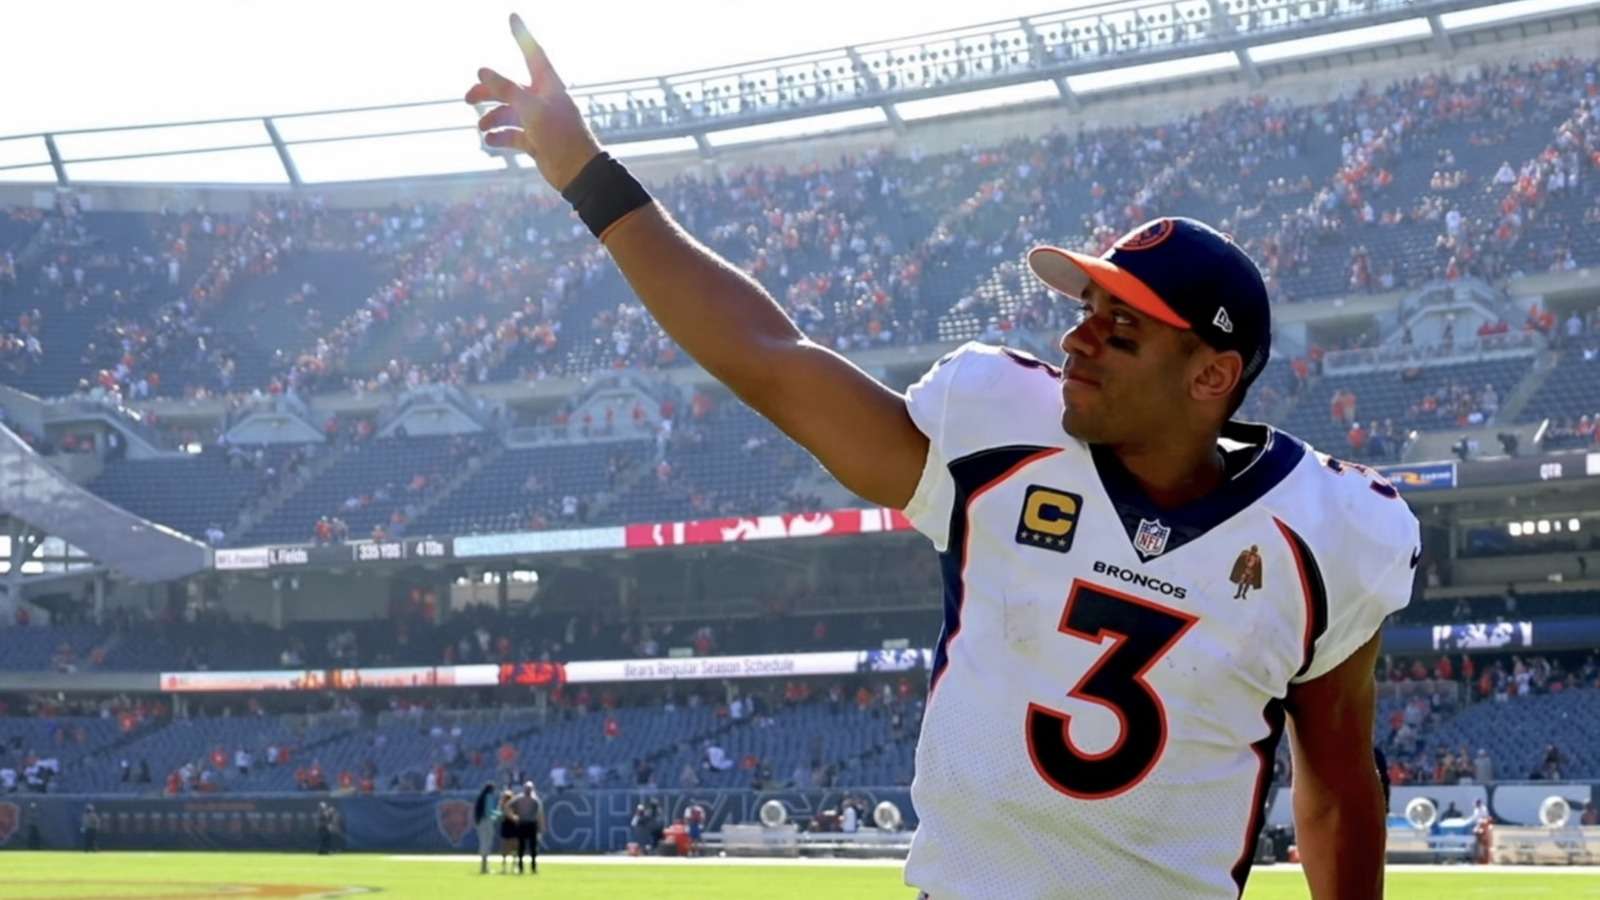 The Broncos will likely move on from Russell Wilson this off-season. Which teams will entertain signing the Super Bowl-winning quarterback?